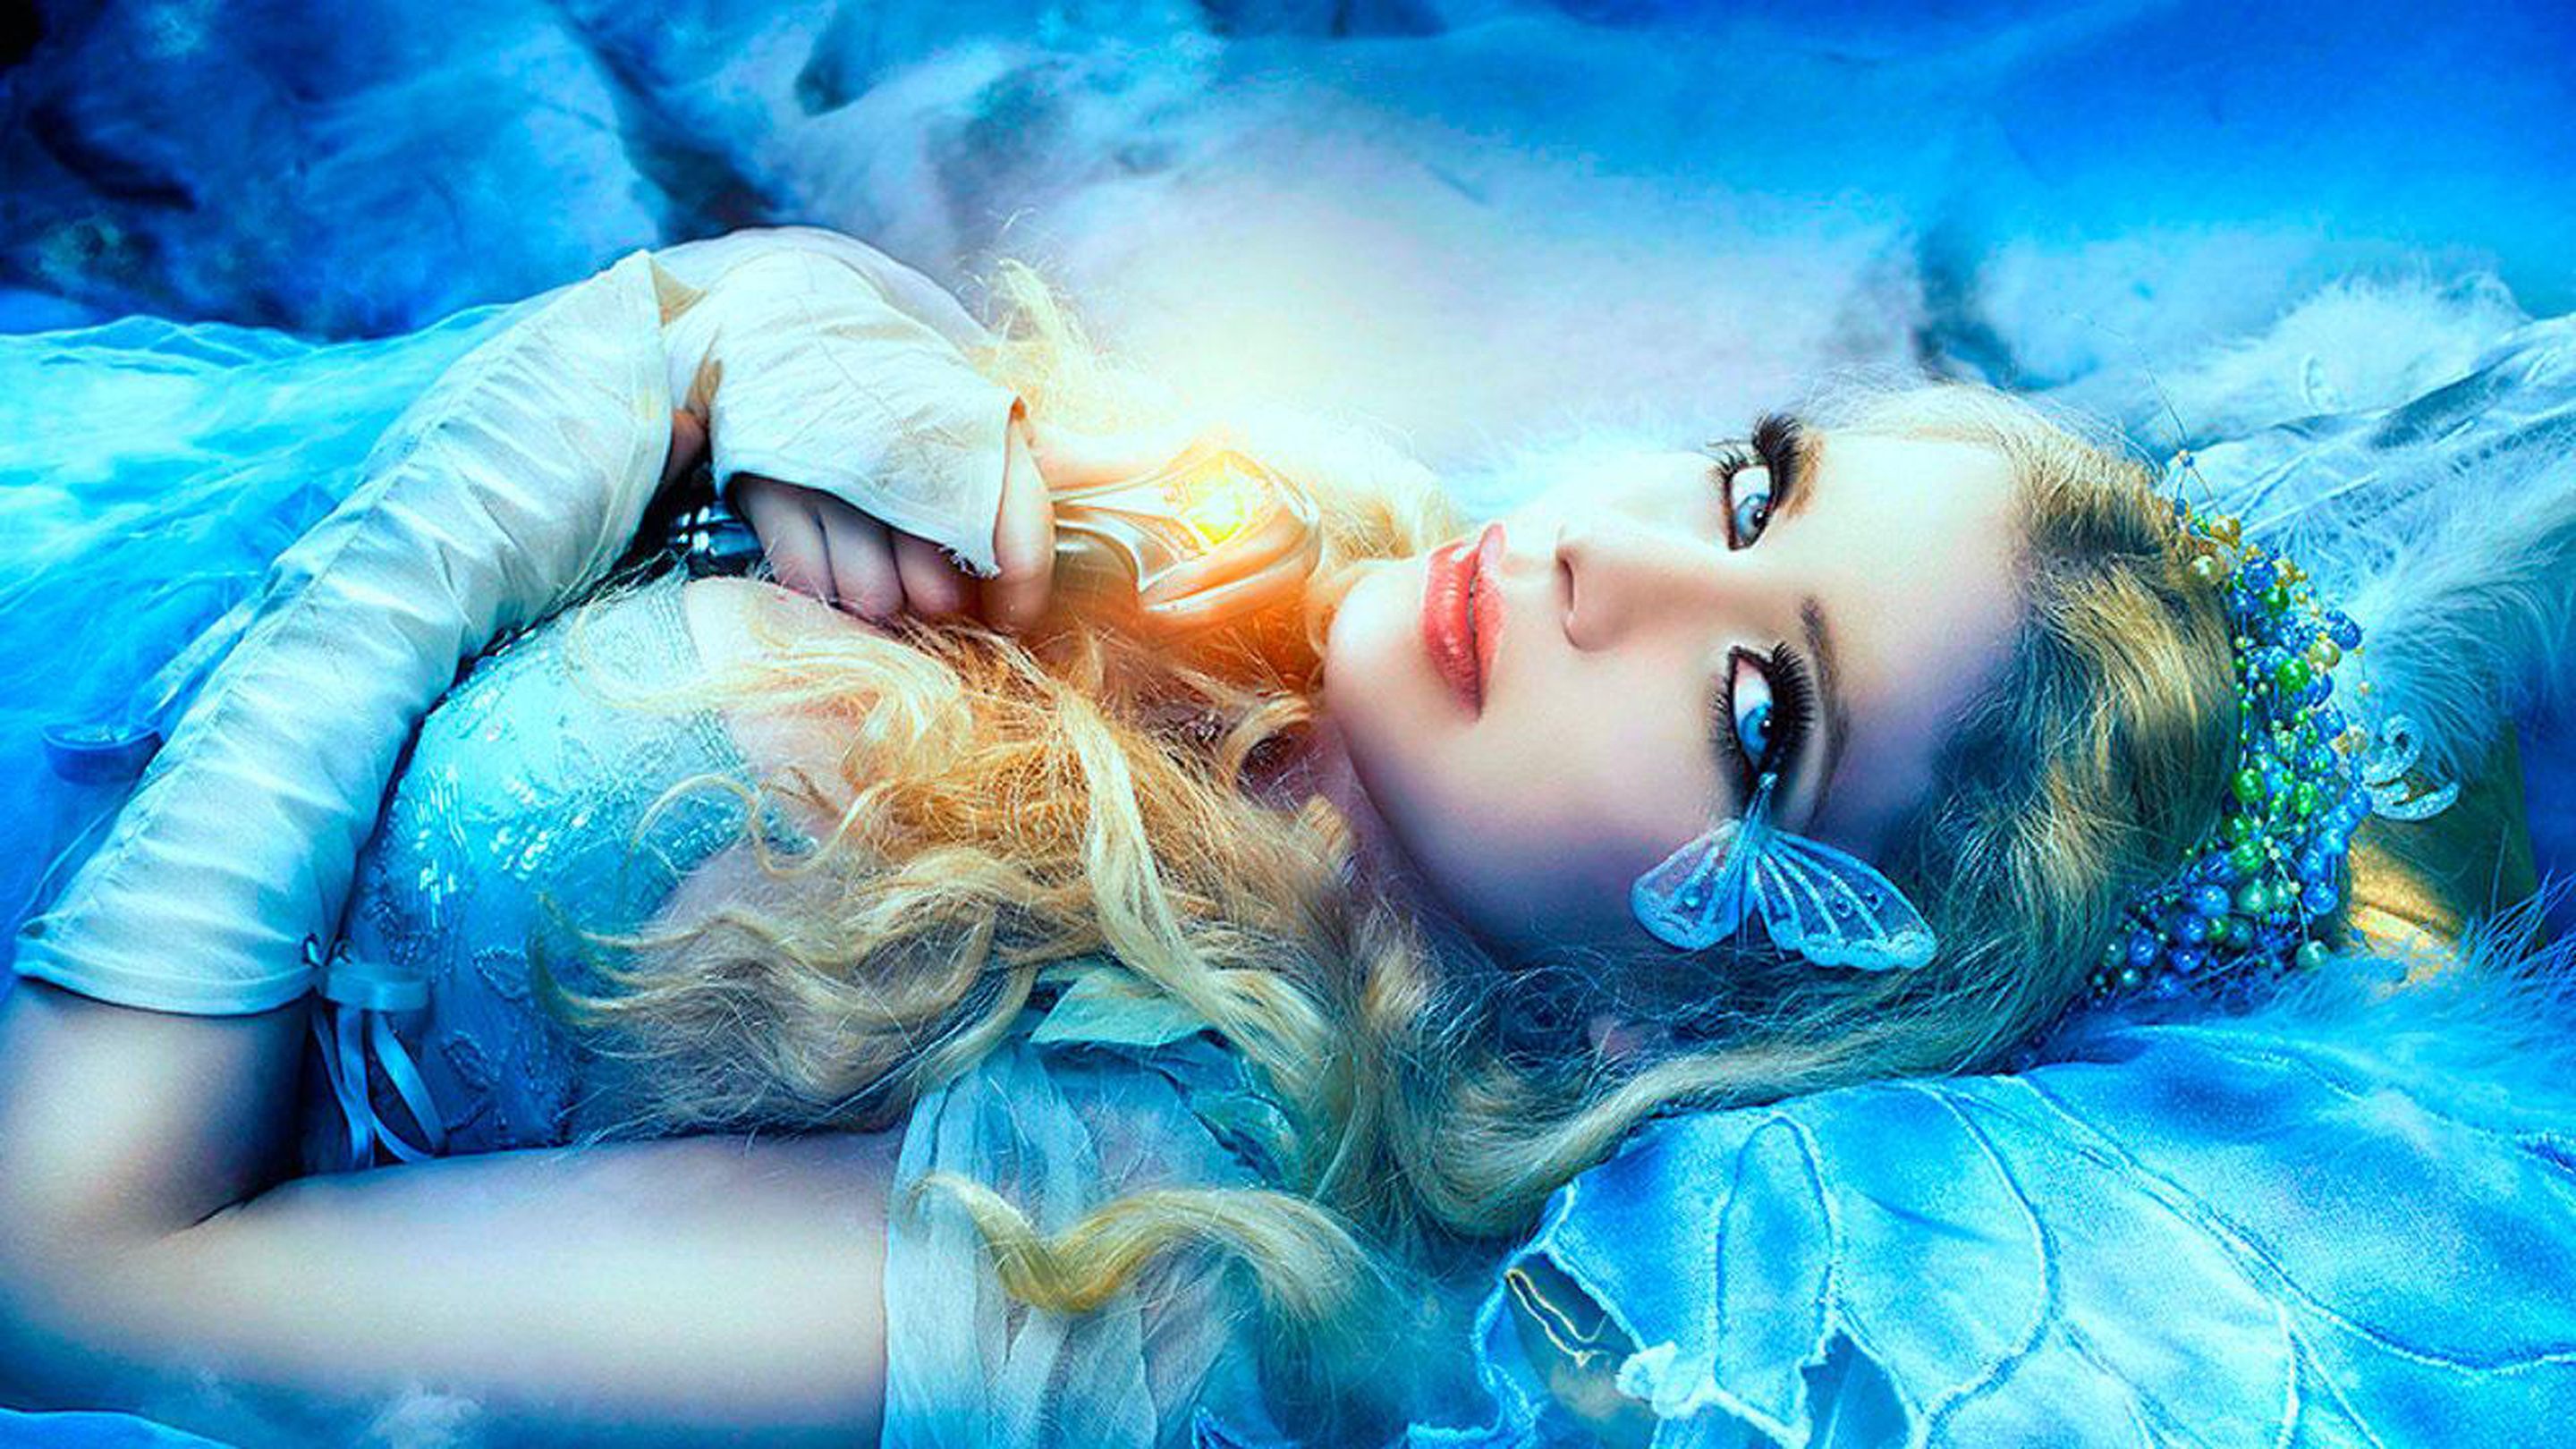 Beautiful Blue Girl With Blue Eyes And Red Lips Fantasy Art